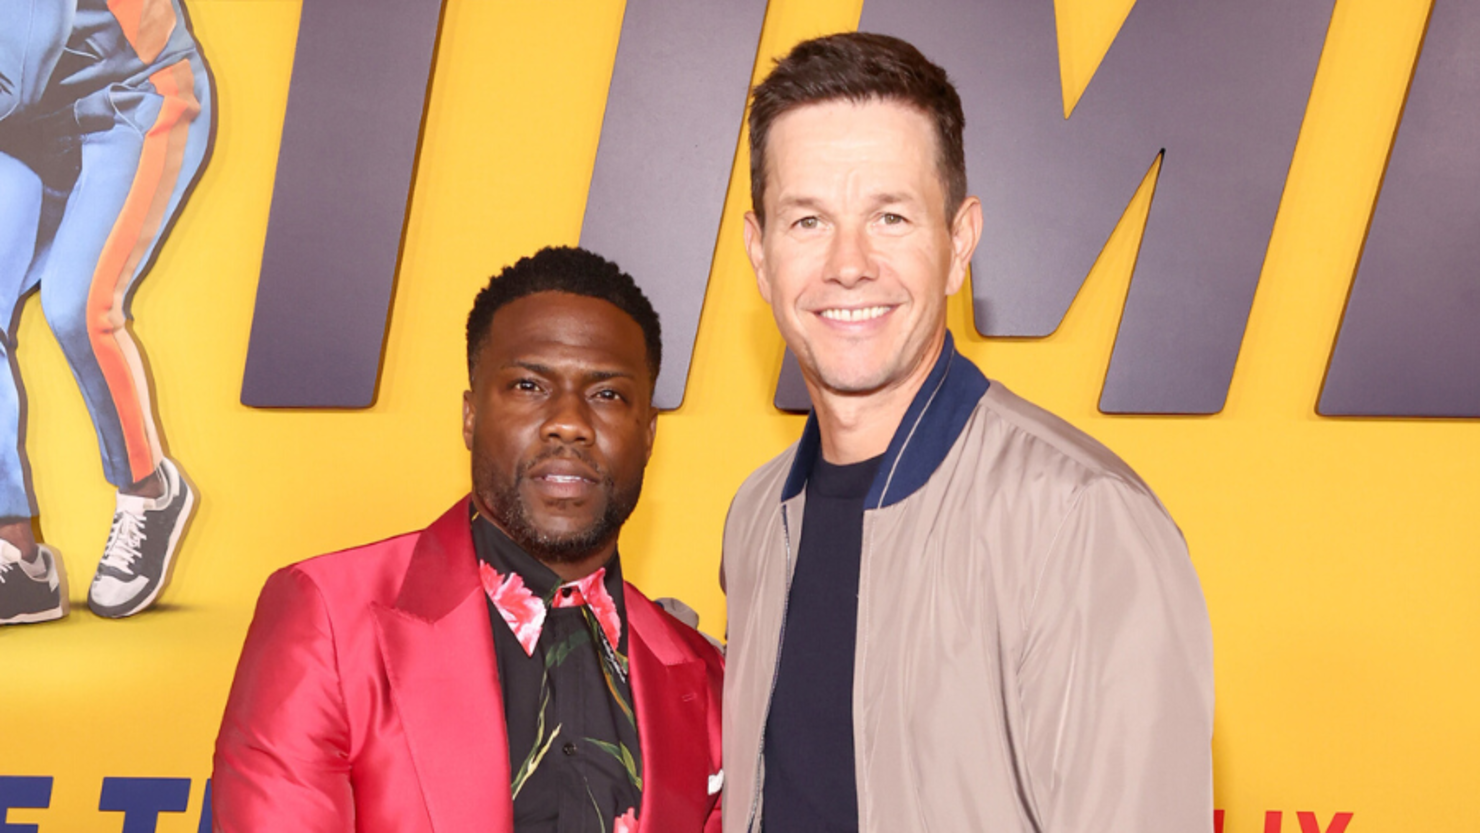 Kevin Hart and Mark Wahlberg